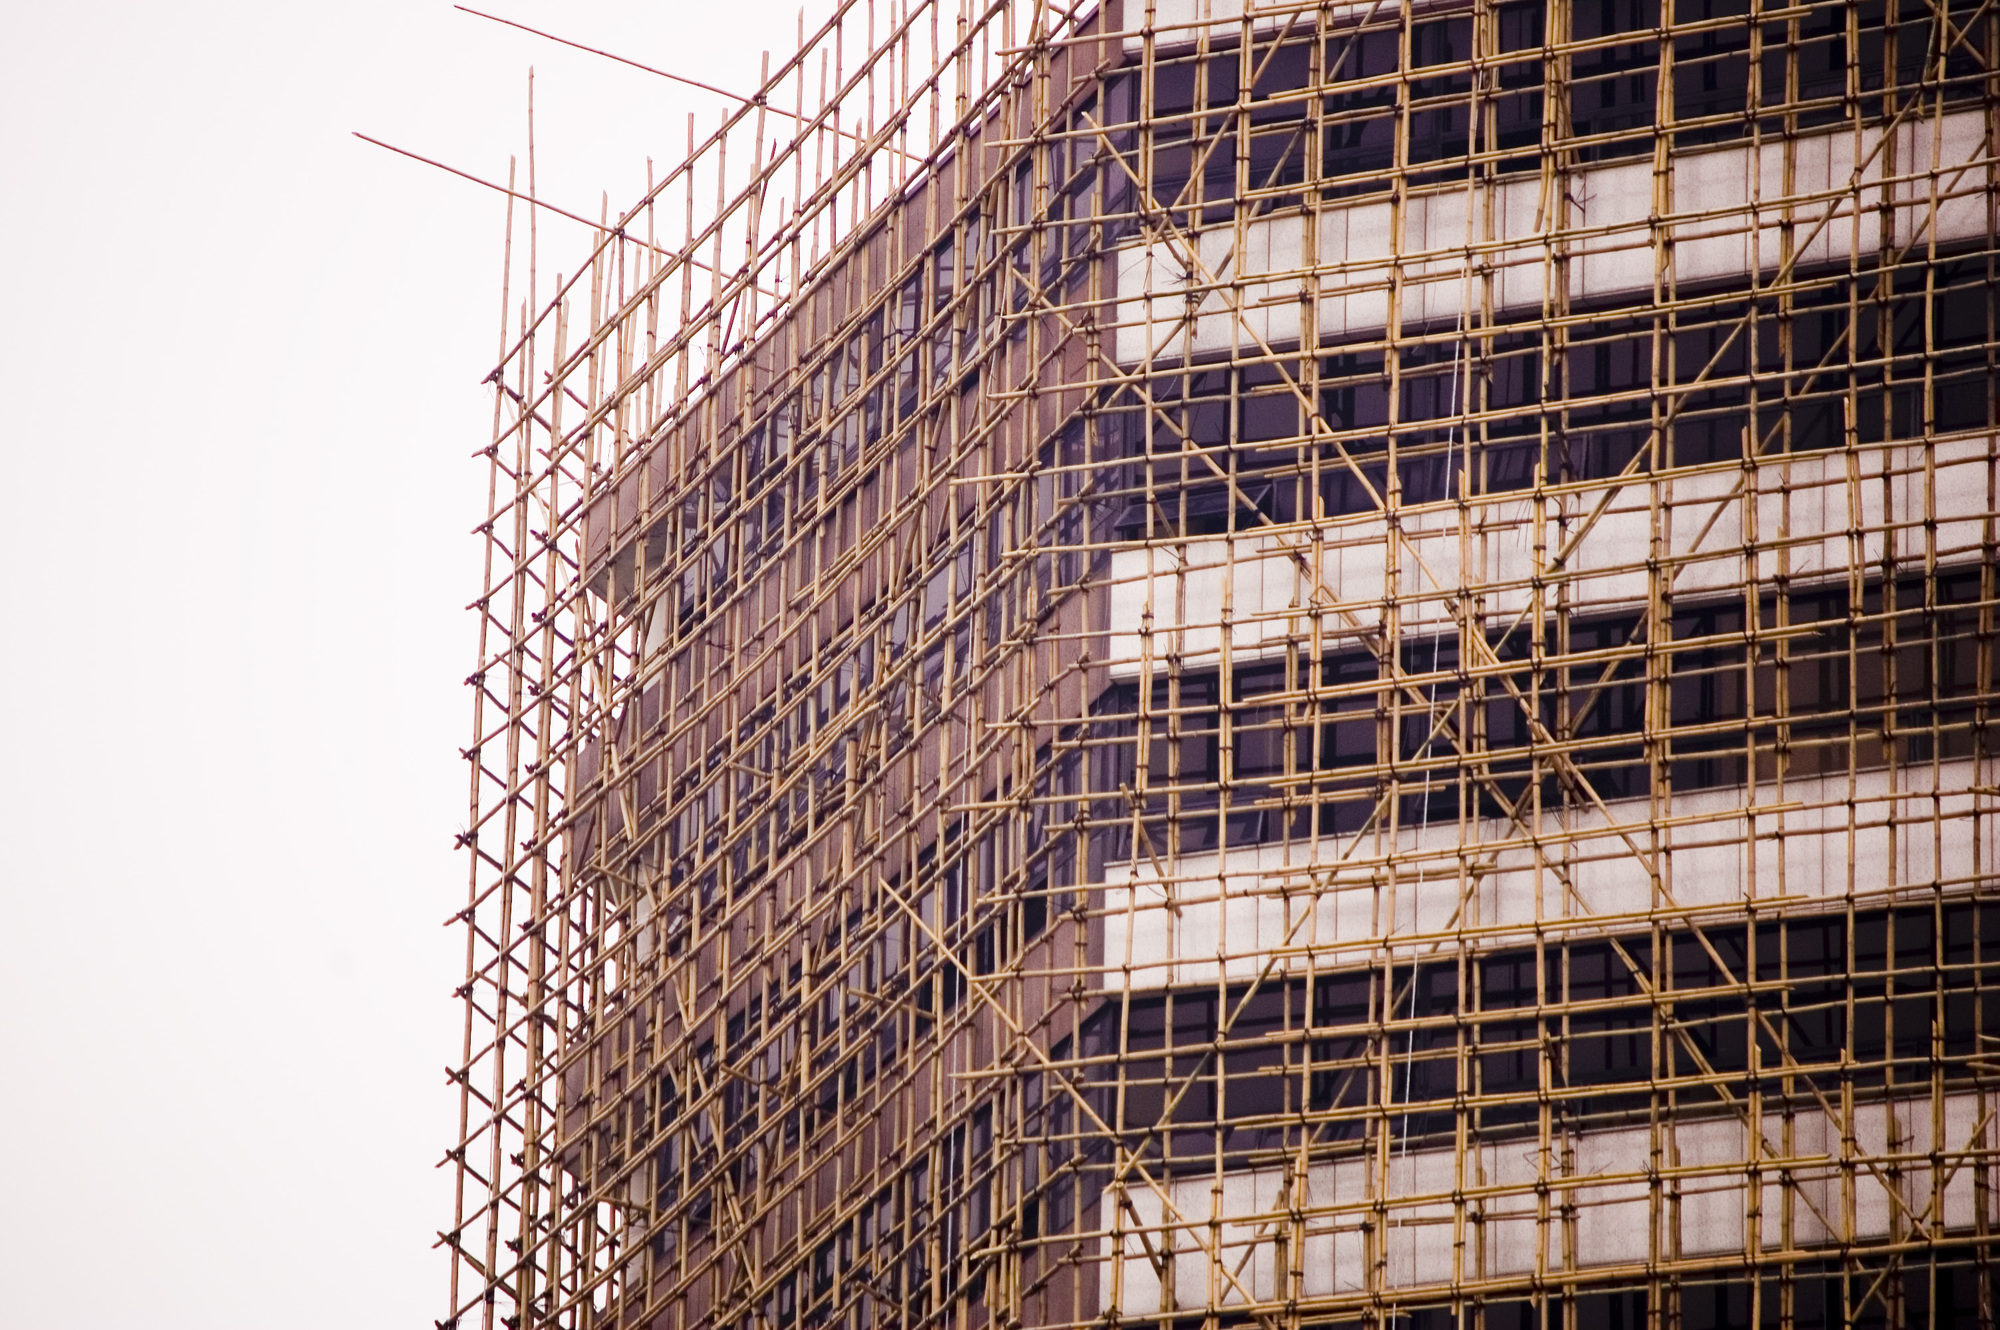 Key points for control of setting up disc-type scaffolding